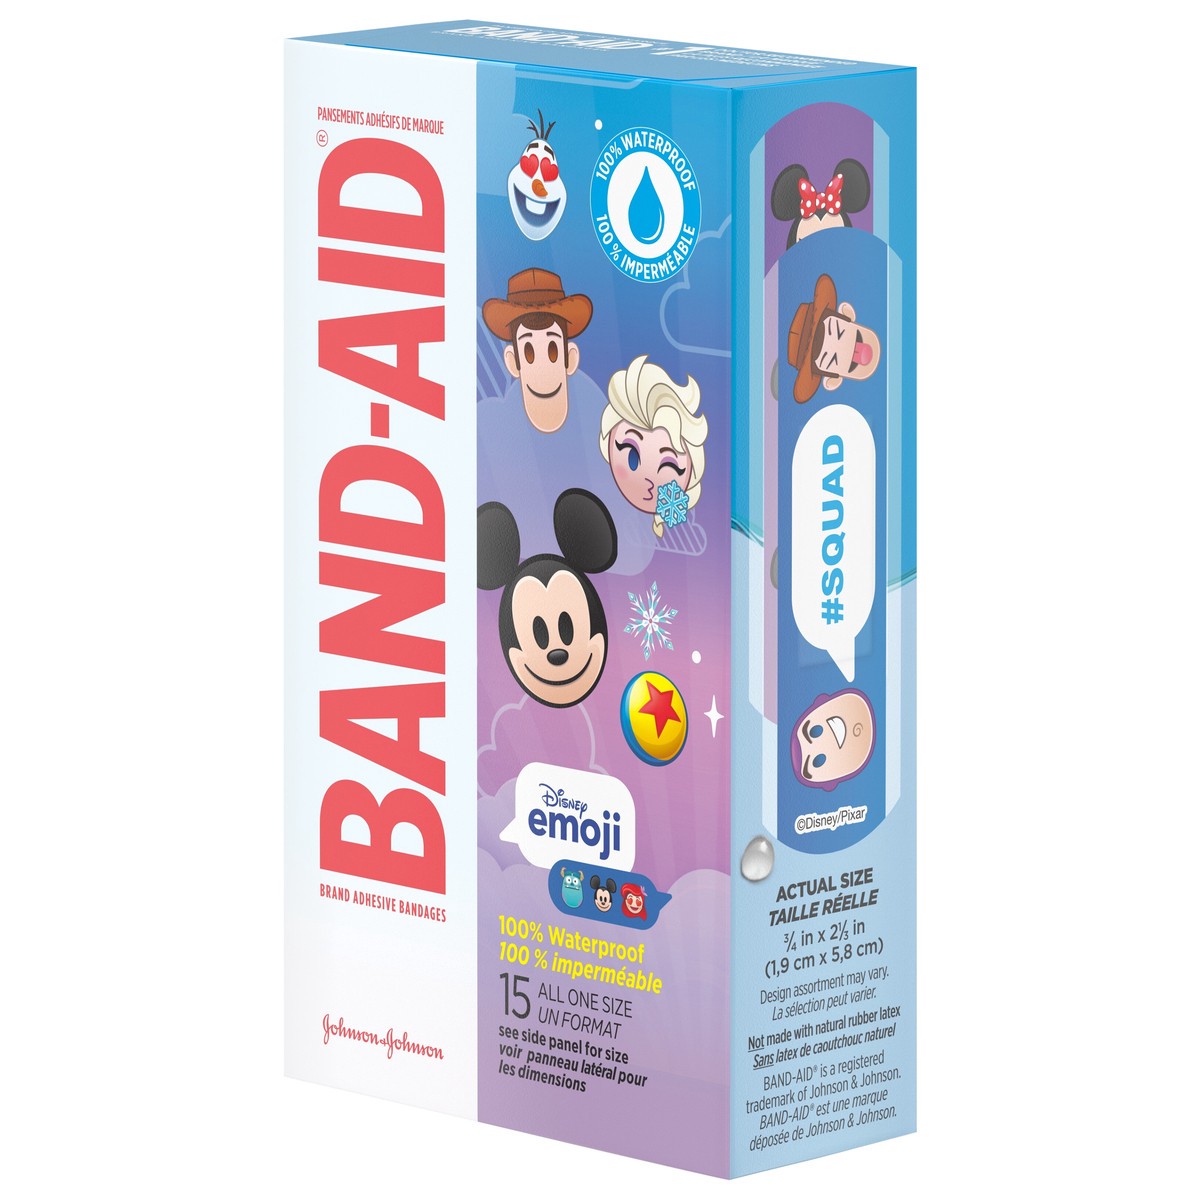 slide 6 of 7, BAND-AID Adhesive Bandages for Minor Cuts & Scrapes, 100% Waterproof Wound Care Bandages for Kids and Toddlers Featuring Disney Emoji Characters, All One Size, 15 ct, 15 ct